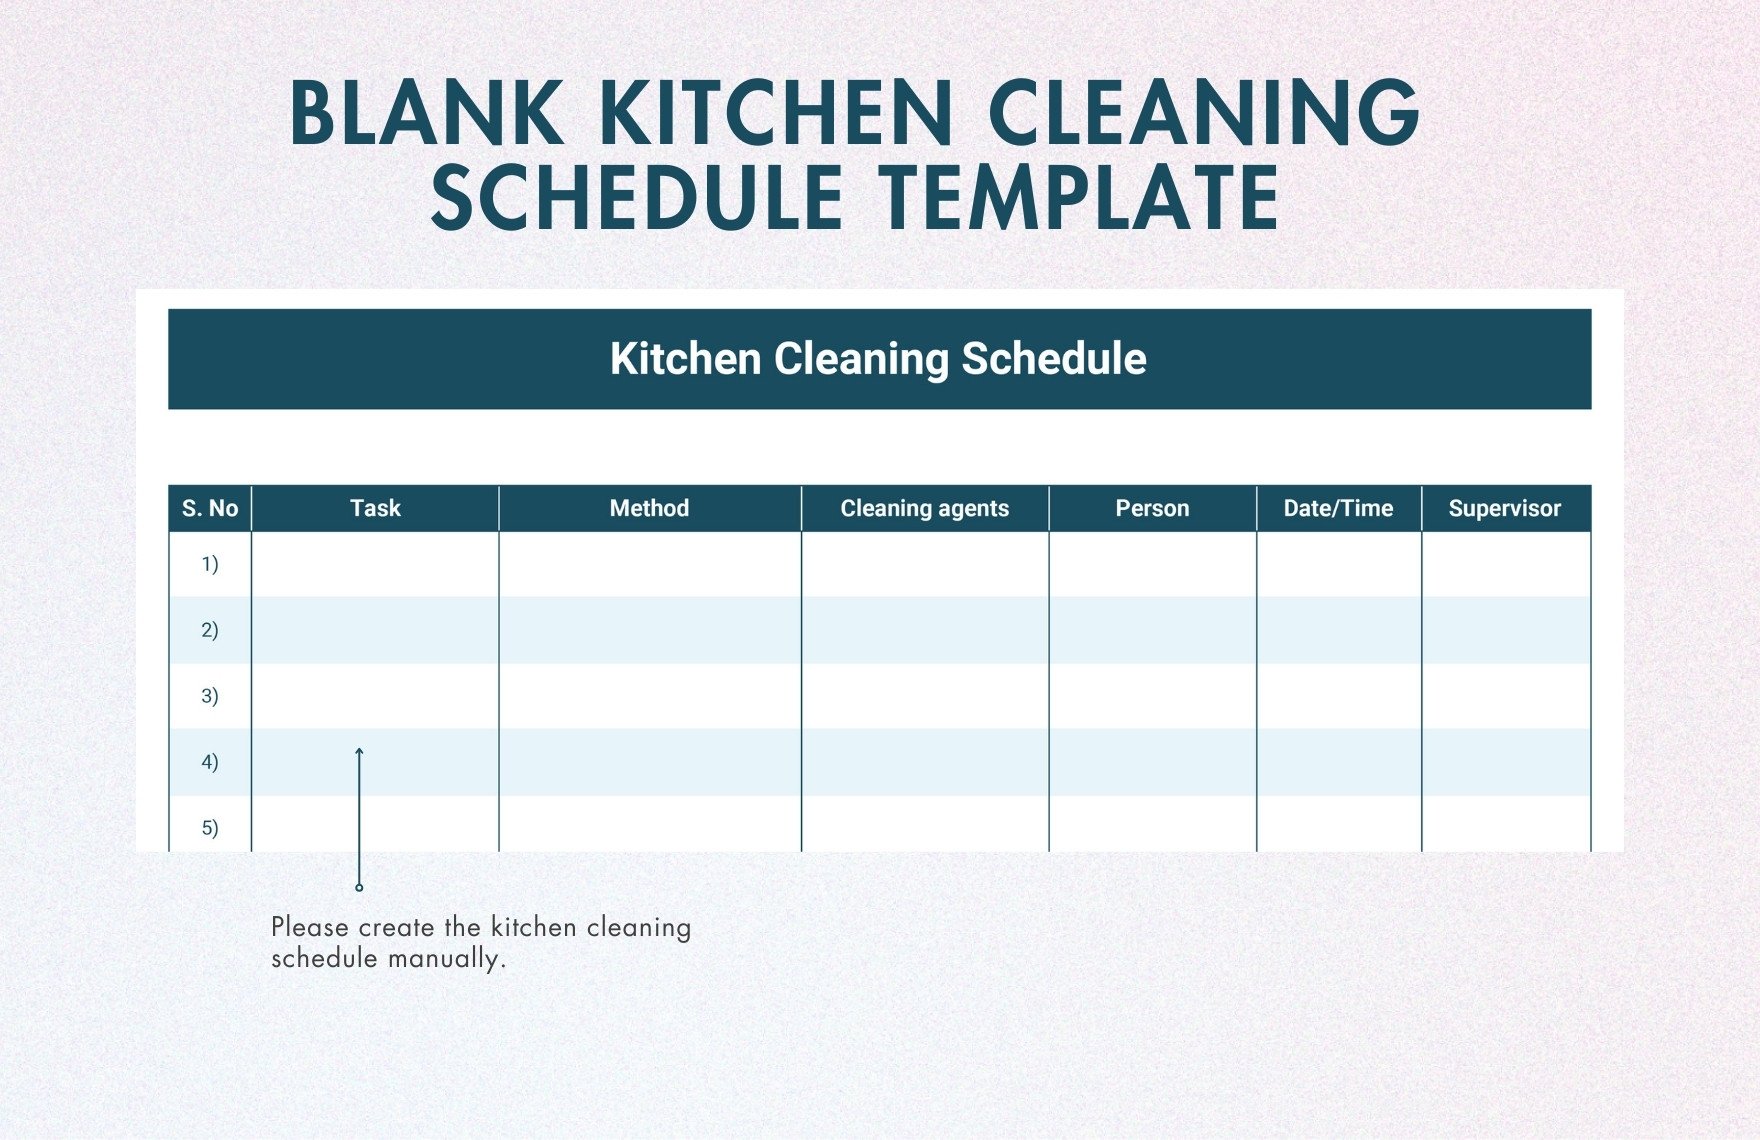 Blank Kitchen Cleaning Schedule Template